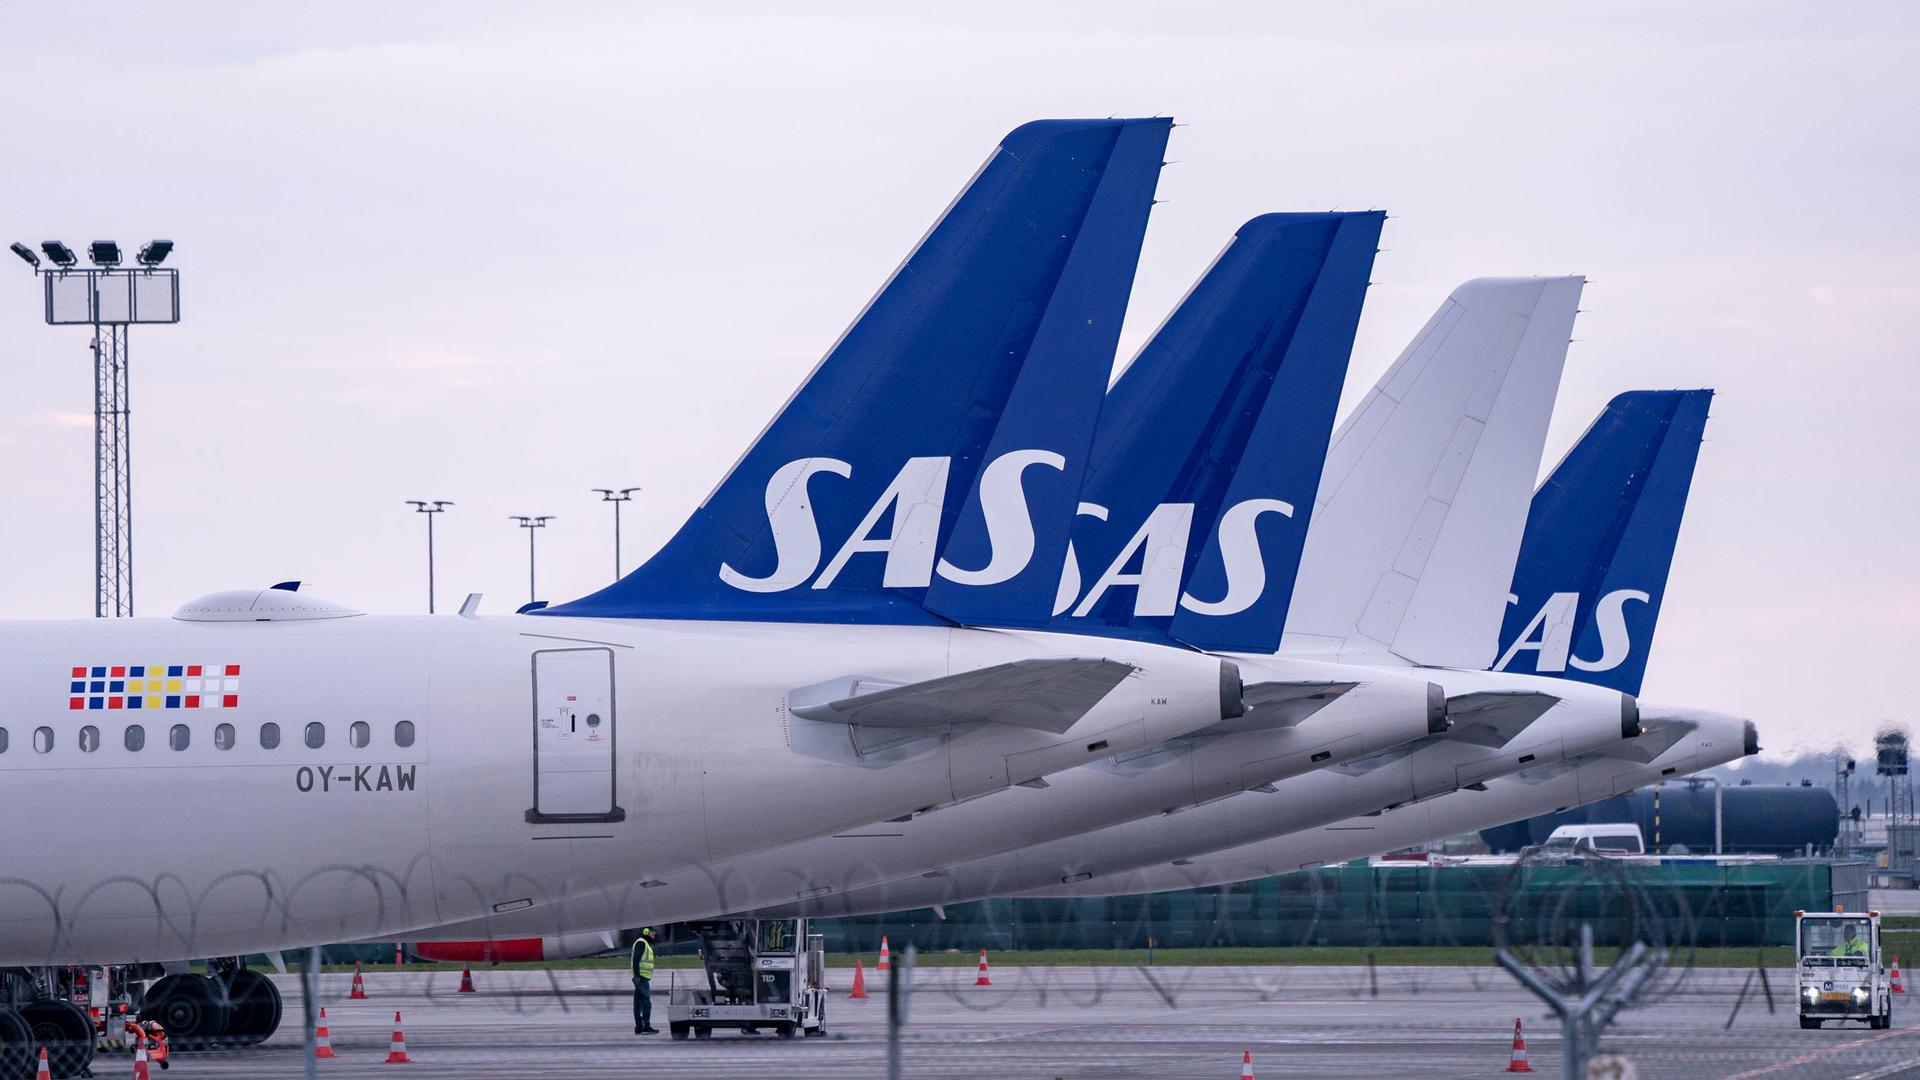 The tails of several aircraft from SAS airlines are shown lined up.